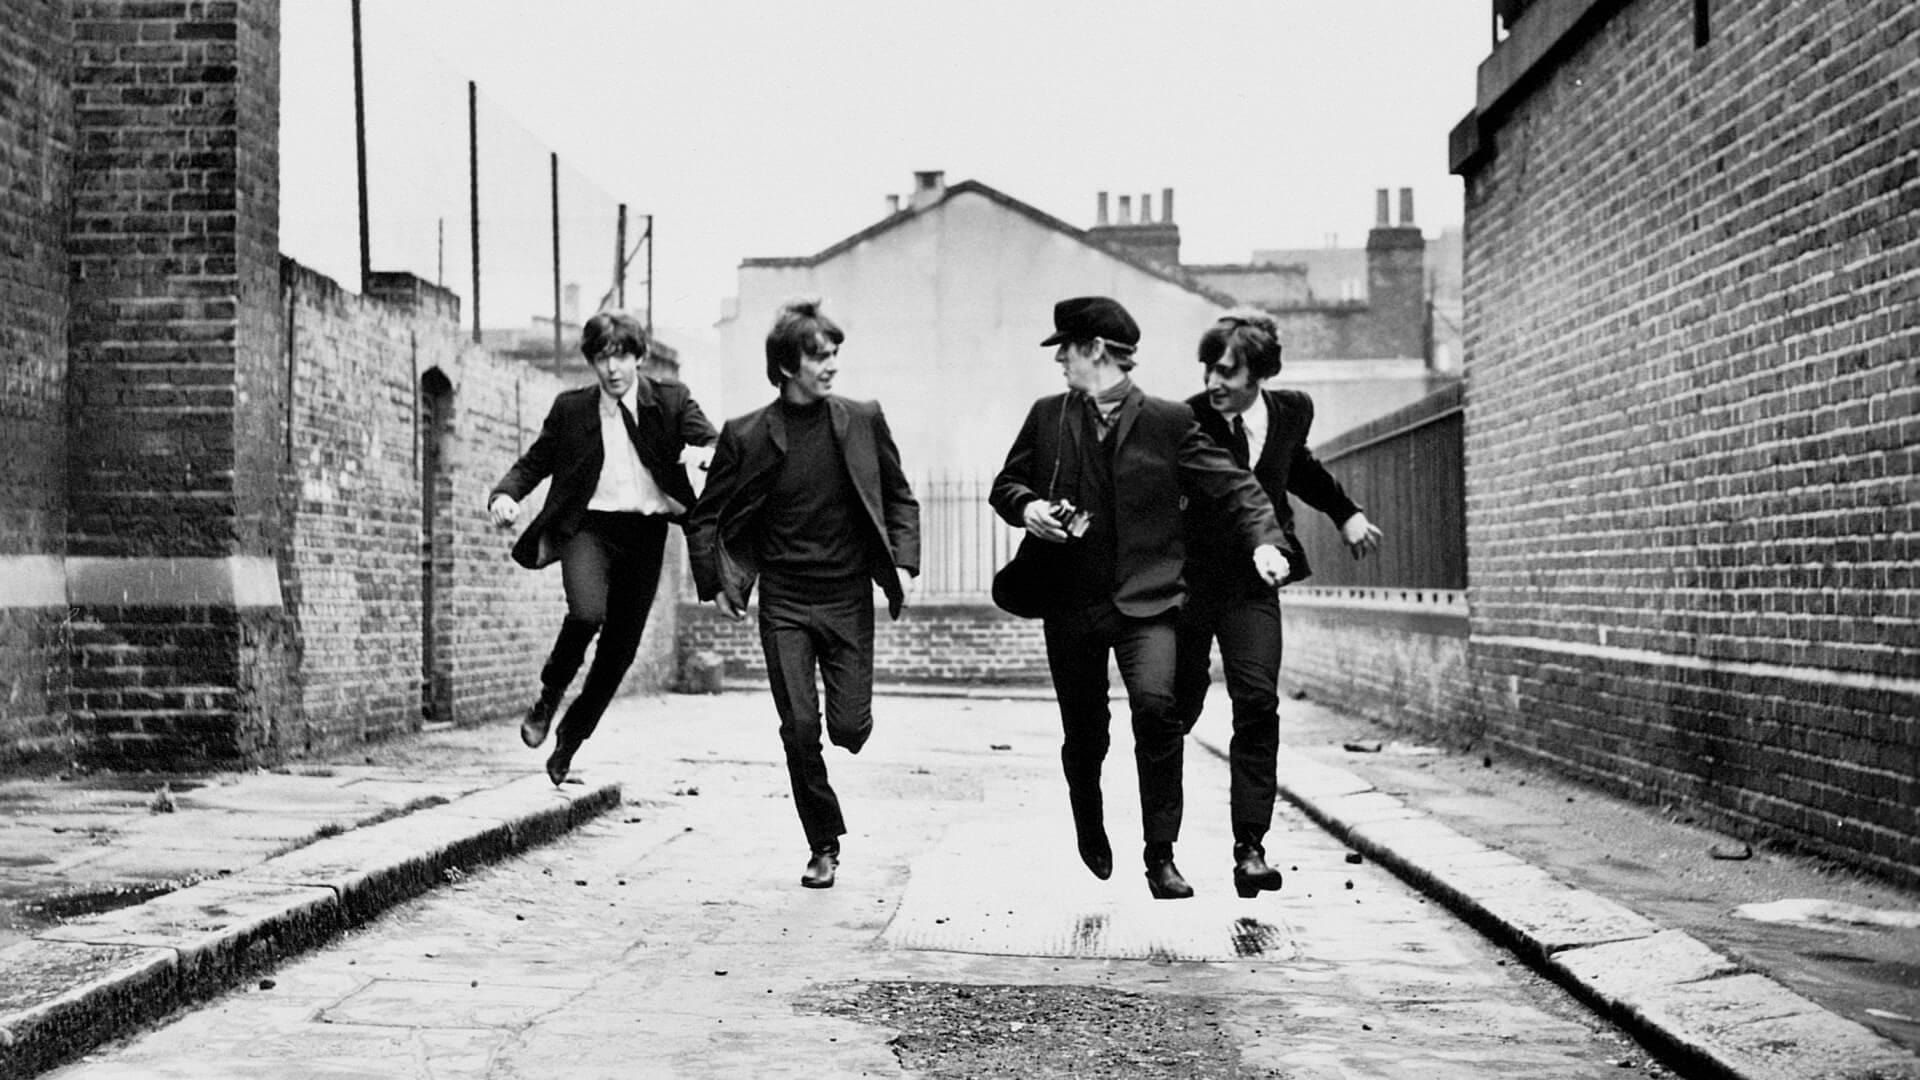 A Hard Day's Night background